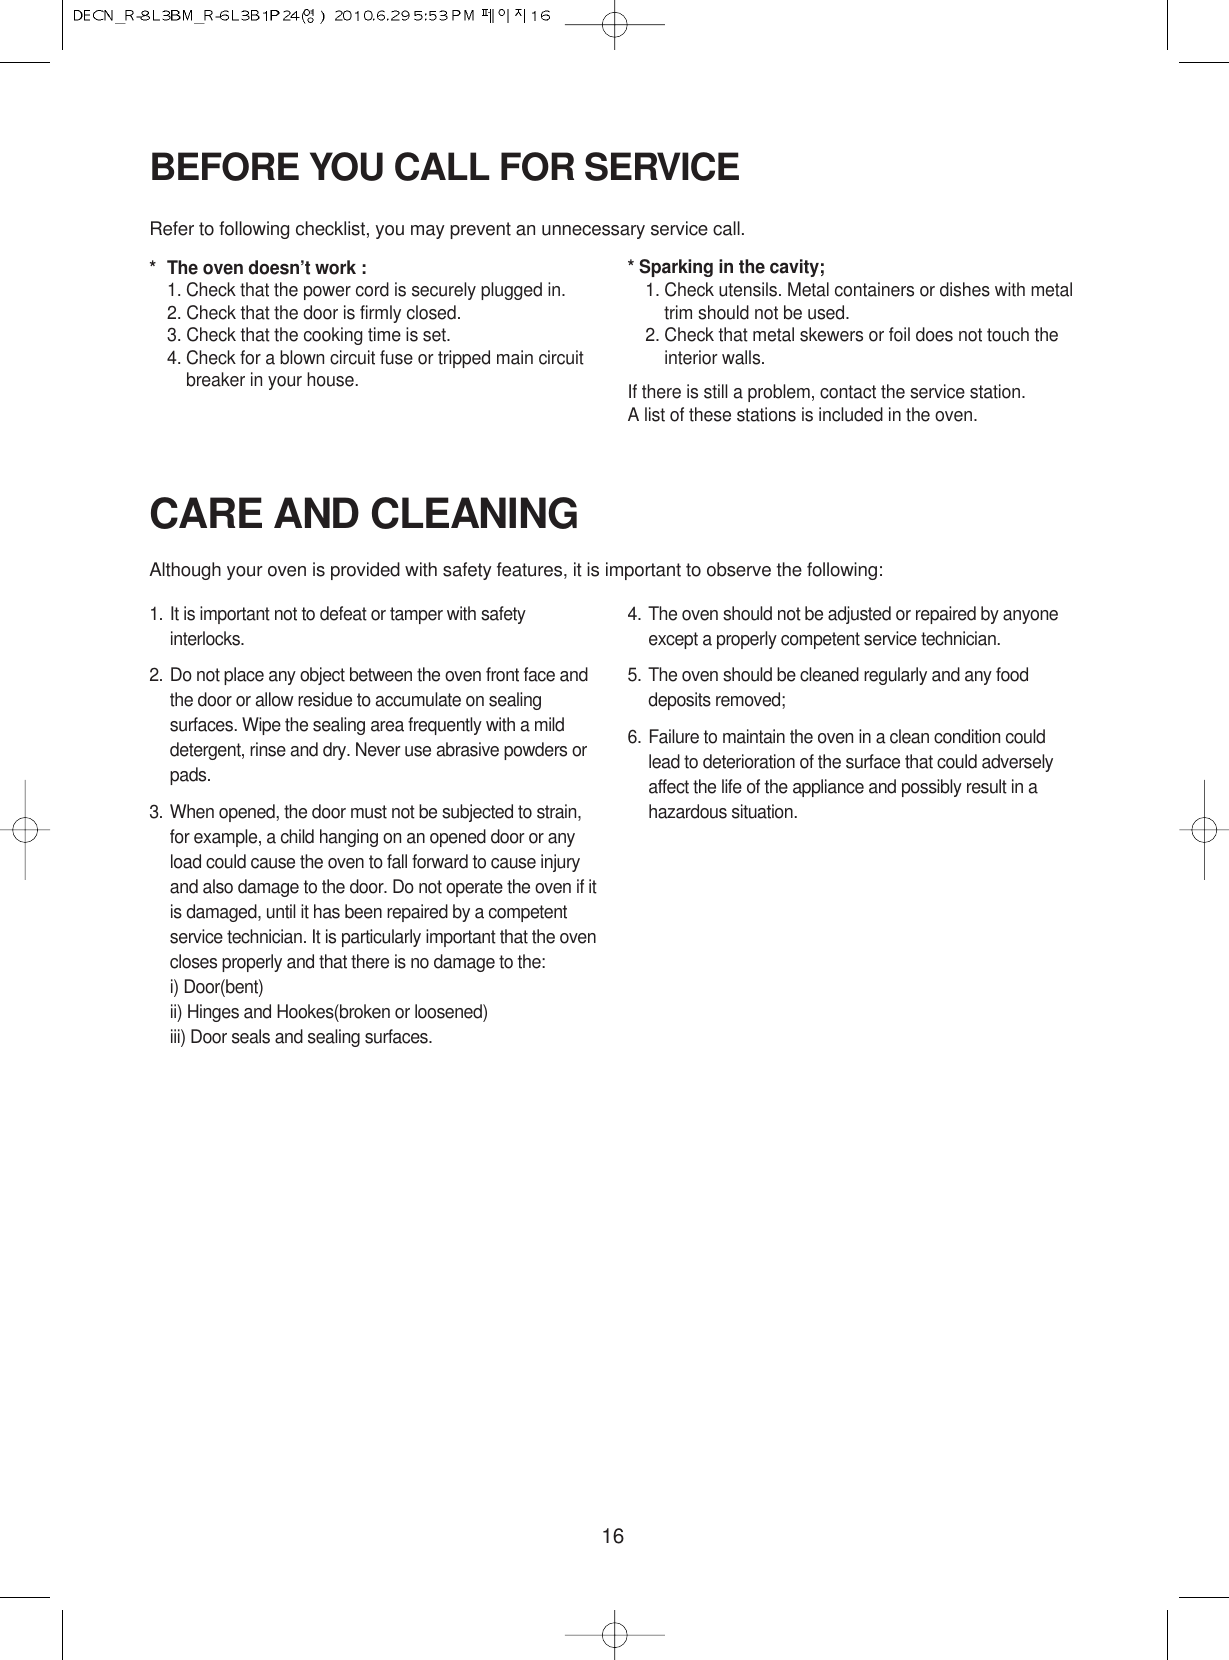 16CARE AND CLEANINGAlthough your oven is provided with safety features, it is important to observe the following:1. It is important not to defeat or tamper with safetyinterlocks.2. Do not place any object between the oven front face andthe door or allow residue to accumulate on sealingsurfaces. Wipe the sealing area frequently with a milddetergent, rinse and dry. Never use abrasive powders orpads.3. When opened, the door must not be subjected to strain,for example, a child hanging on an opened door or anyload could cause the oven to fall forward to cause injuryand also damage to the door. Do not operate the oven if itis damaged, until it has been repaired by a competentservice technician. It is particularly important that the ovencloses properly and that there is no damage to the:i) Door(bent)ii) Hinges and Hookes(broken or loosened)iii) Door seals and sealing surfaces.4. The oven should not be adjusted or repaired by anyoneexcept a properly competent service technician.5. The oven should be cleaned regularly and any fooddeposits removed;6. Failure to maintain the oven in a clean condition couldlead to deterioration of the surface that could adverselyaffect the life of the appliance and possibly result in ahazardous situation.BEFORE YOU CALL FOR SERVICERefer to following checklist, you may prevent an unnecessary service call.*The oven doesn’t work :1. Check that the power cord is securely plugged in.2. Check that the door is firmly closed.3. Check that the cooking time is set.4. Check for a blown circuit fuse or tripped main circuitbreaker in your house.* Sparking in the cavity;1. Check utensils. Metal containers or dishes with metaltrim should not be used.2. Check that metal skewers or foil does not touch theinterior walls.If there is still a problem, contact the service station.A list of these stations is included in the oven.